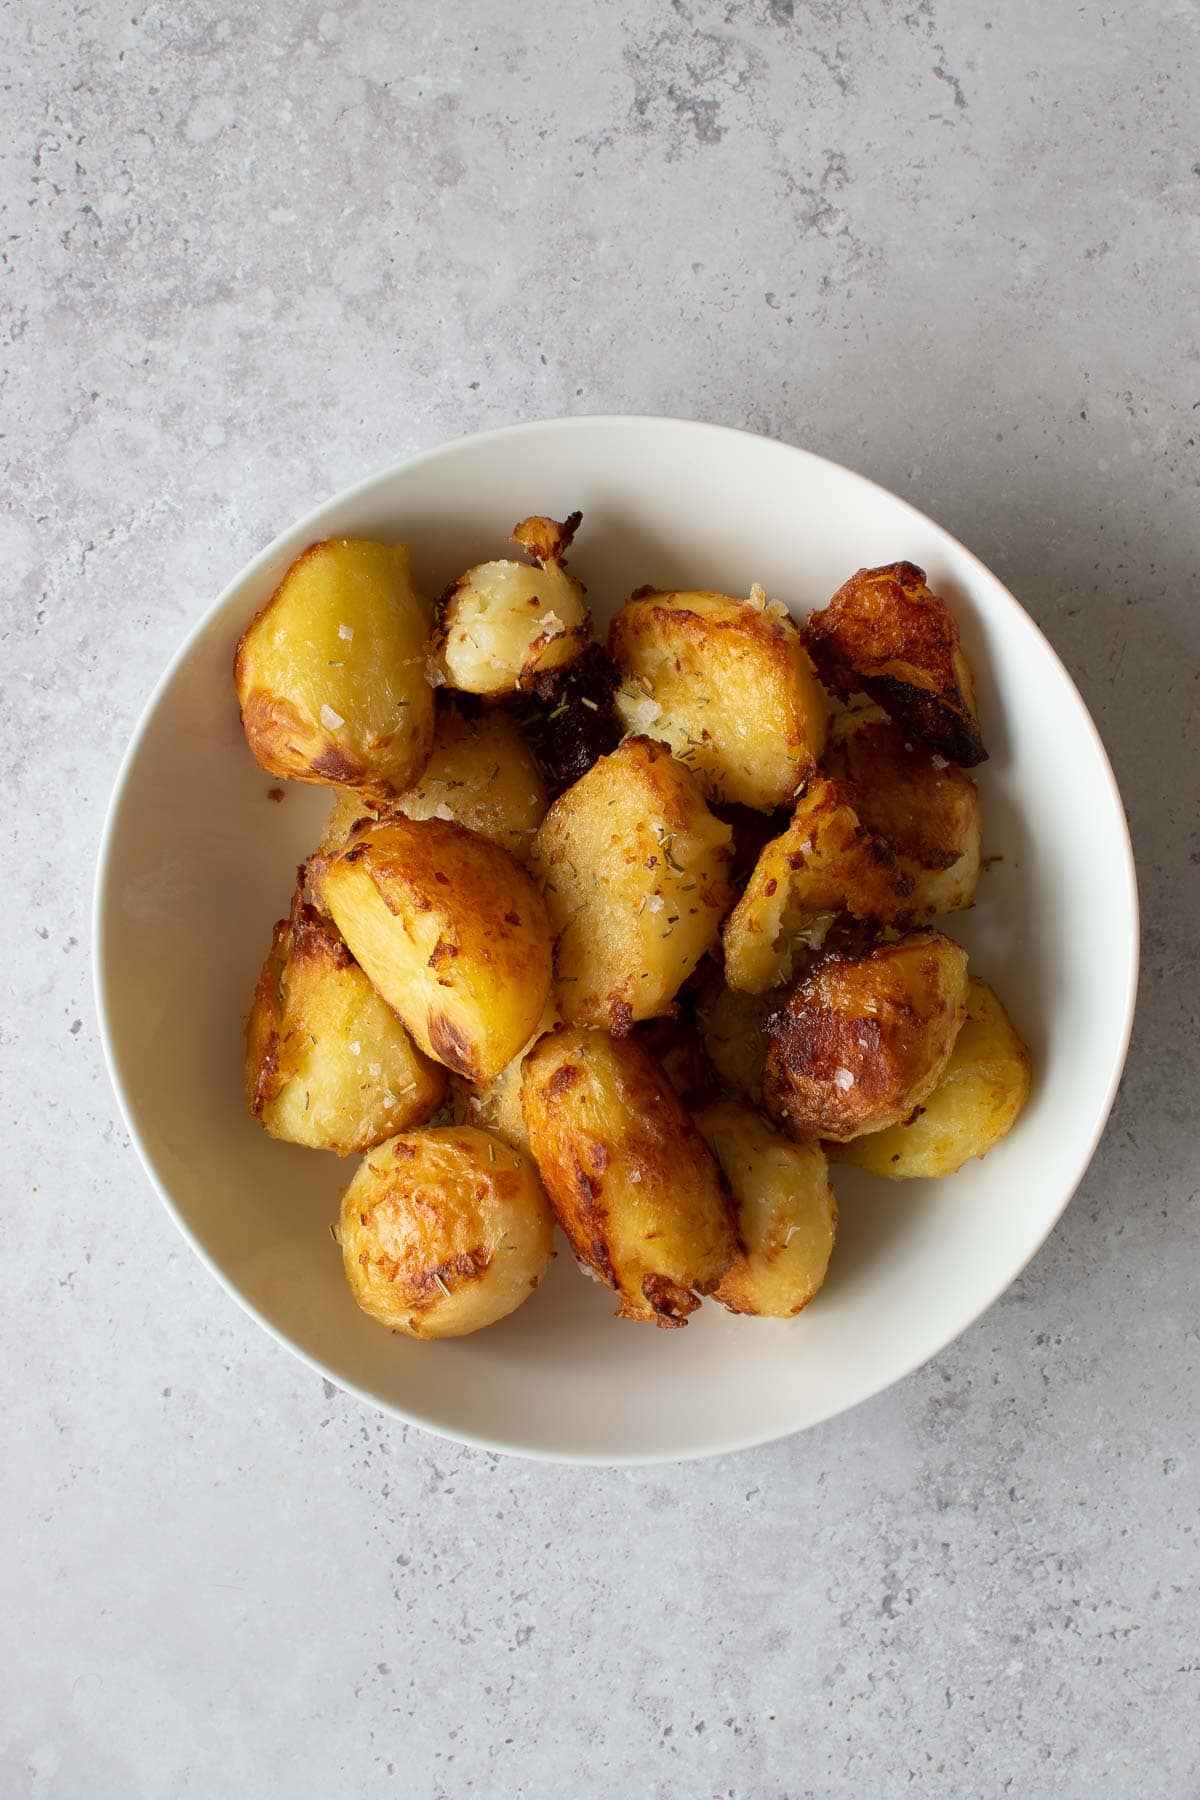 A bowl of roasted potatoes.